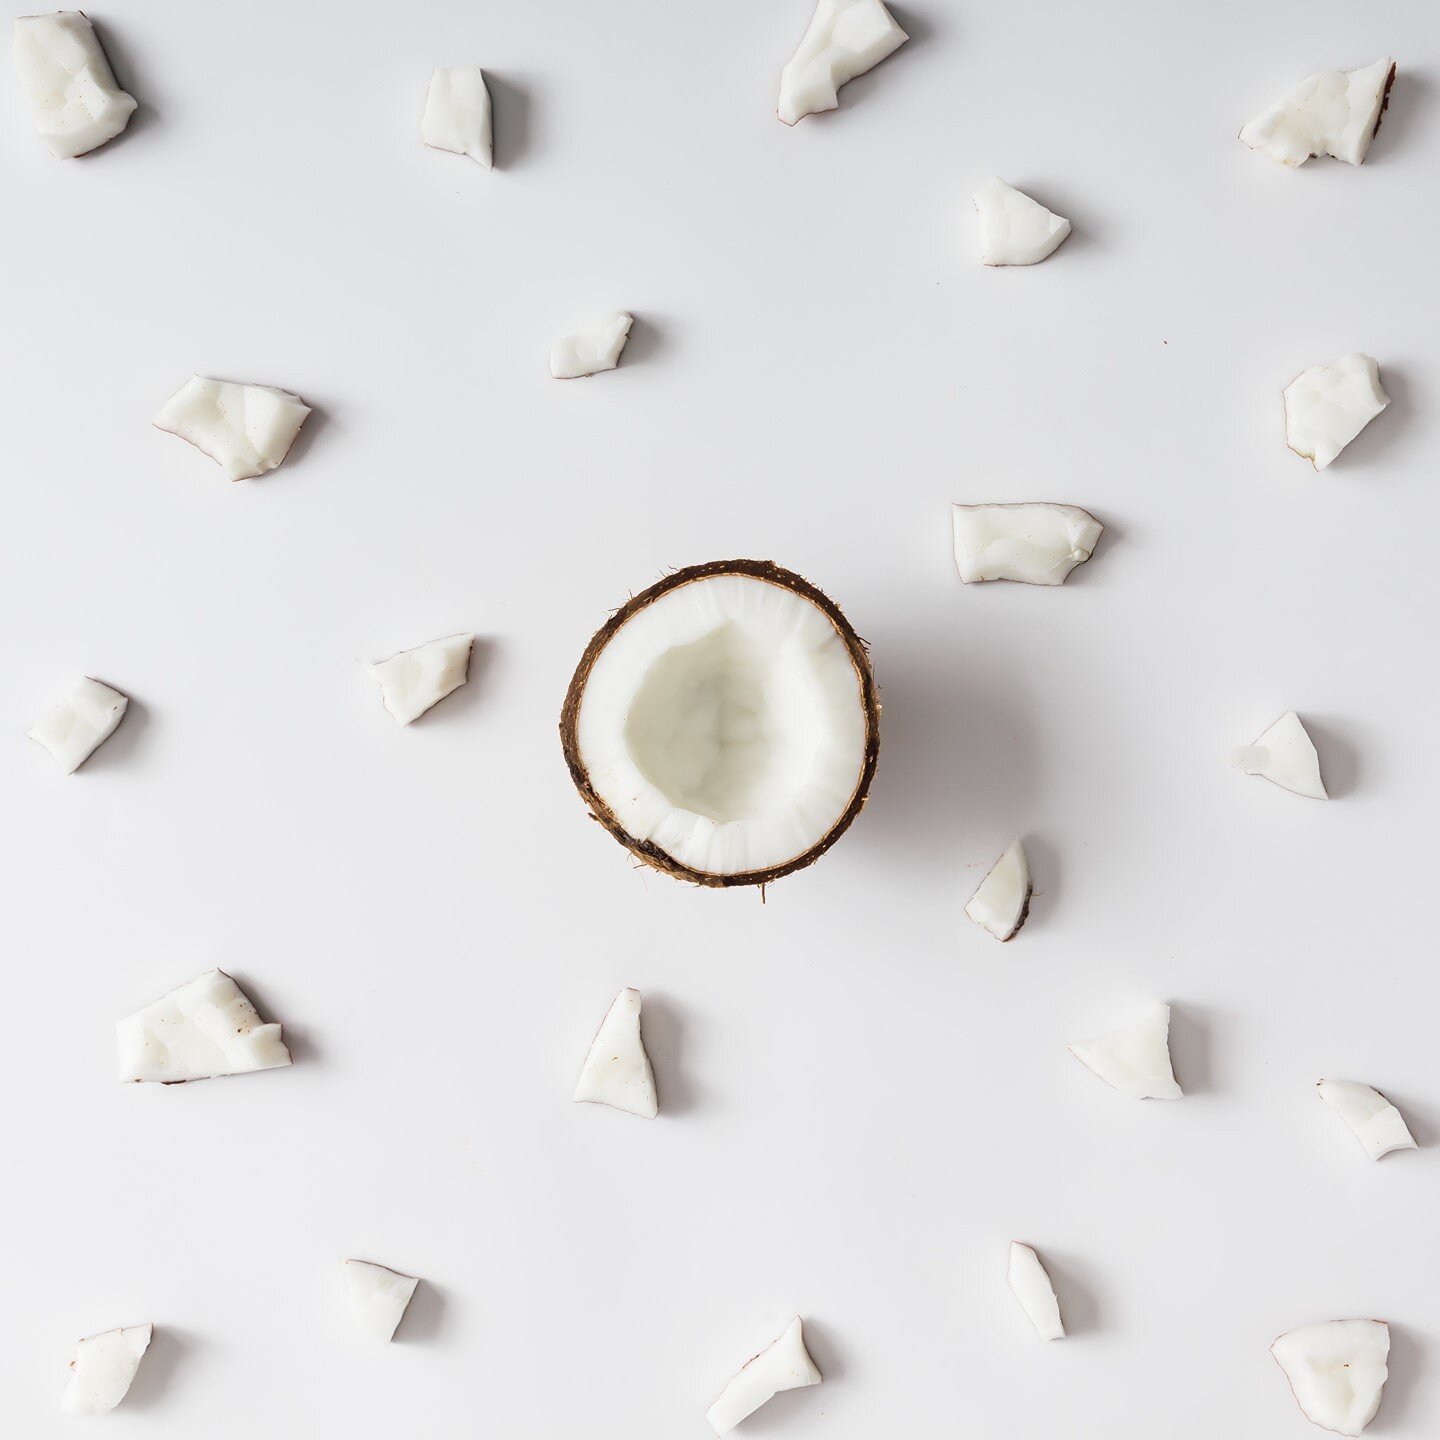 #Ingredientspotlight 🥥 Coconuts are packed with antioxidants that offer many benefits for the skin. It's moisturizing, anti-aging, antibacterial, improves barrier function, and can reduce swelling and inflammation in the skin. Who wouldn't want this